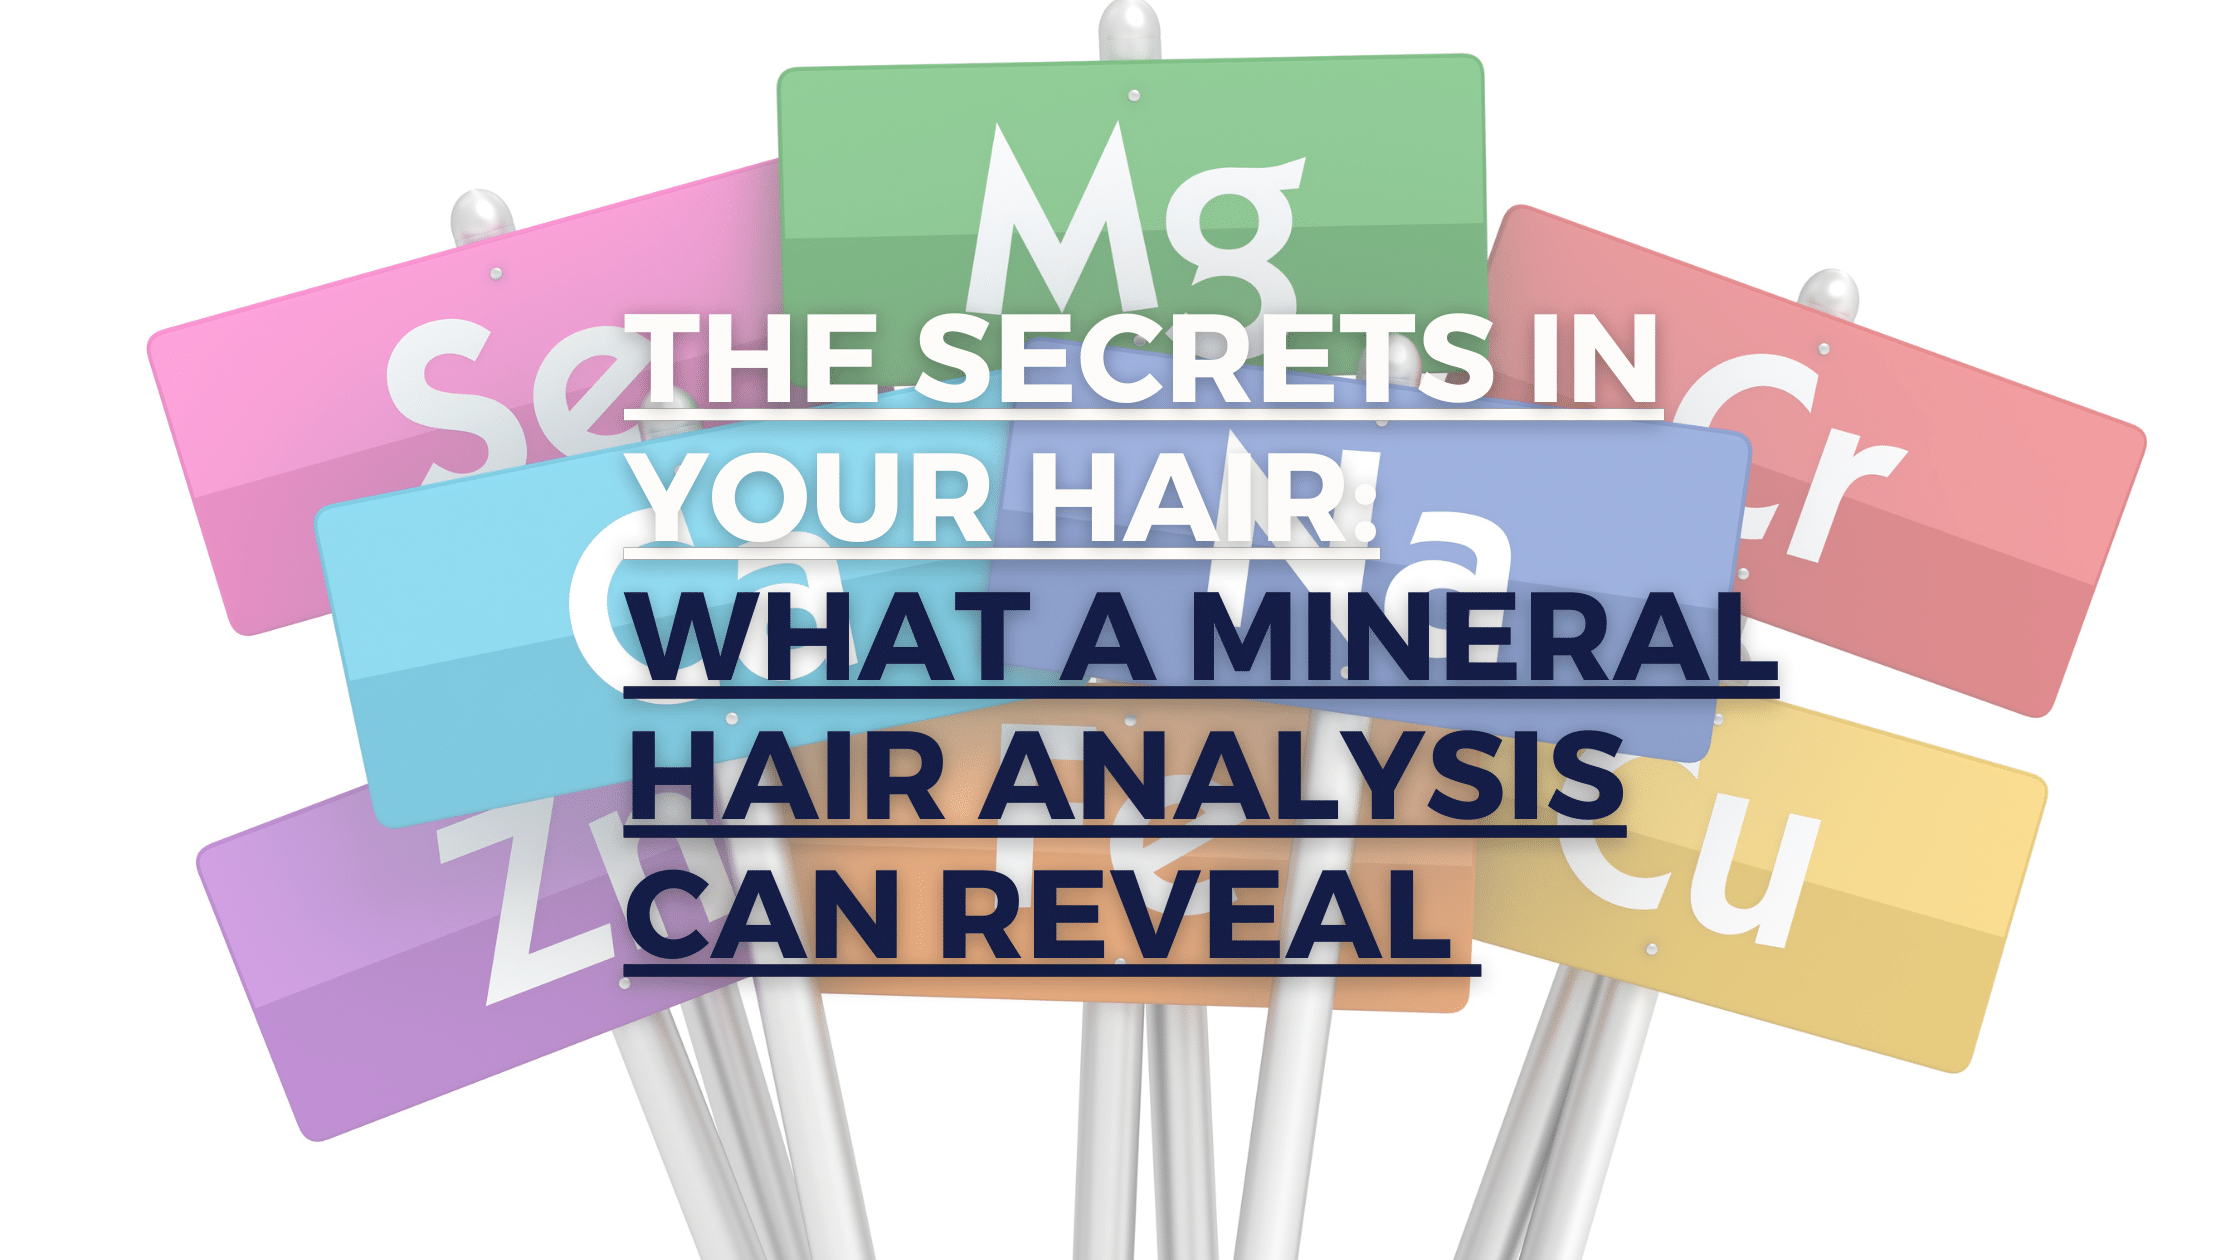 The Secrets in Your Hair: What a Mineral Hair Analysis Can Reveal